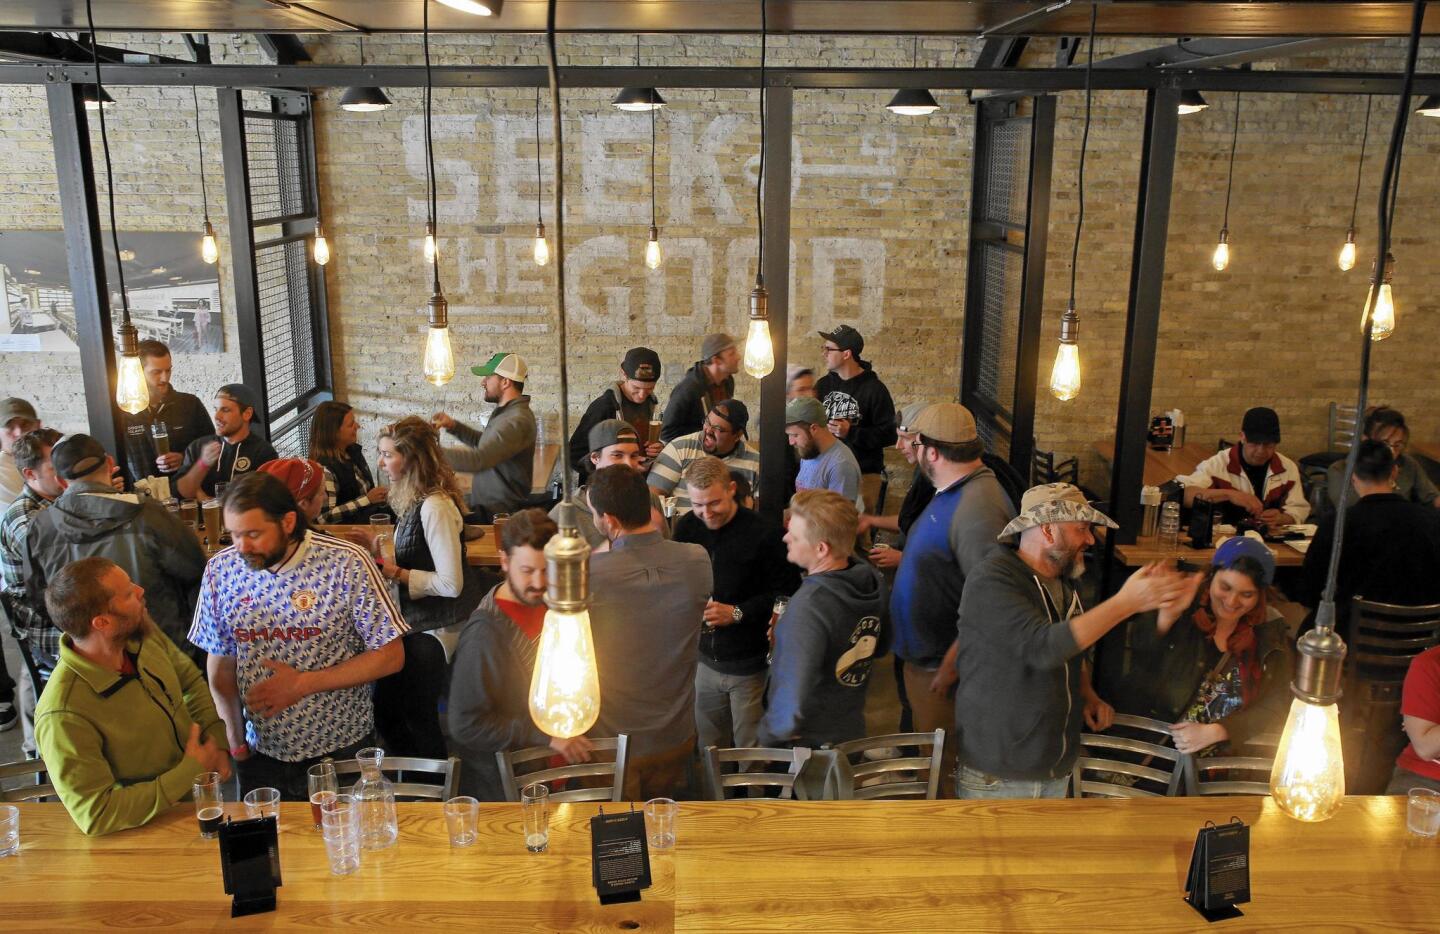 Patrons drink in the taproom at Good City Brewing, which opened last year.